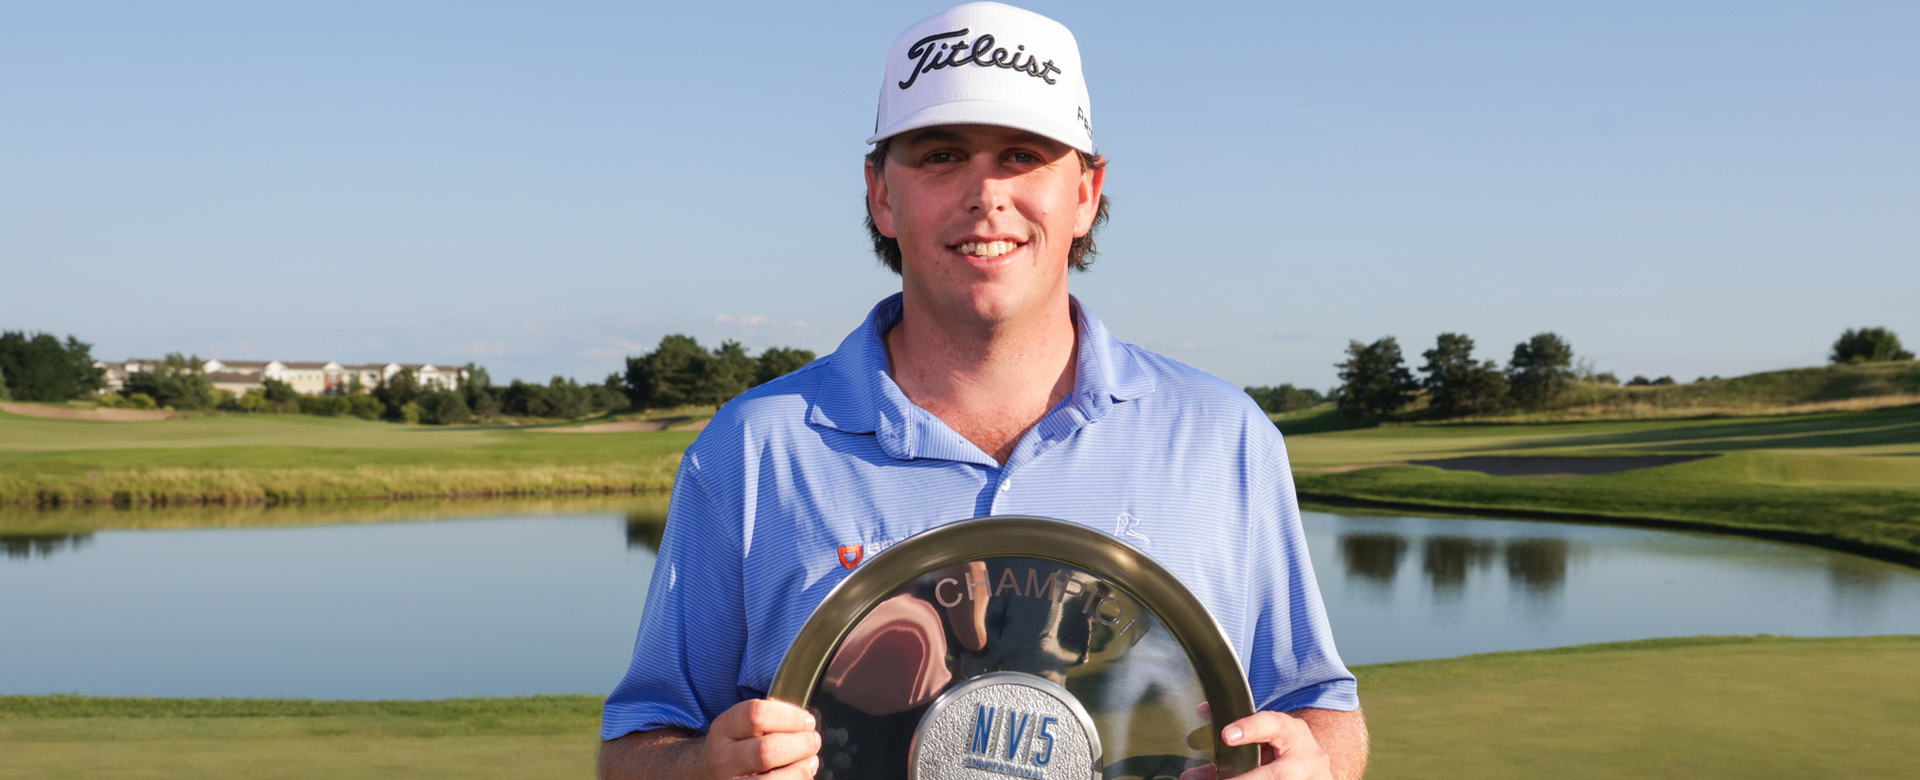 Trace Crowe prevails in thrilling playoff, wins NV5 Invitational